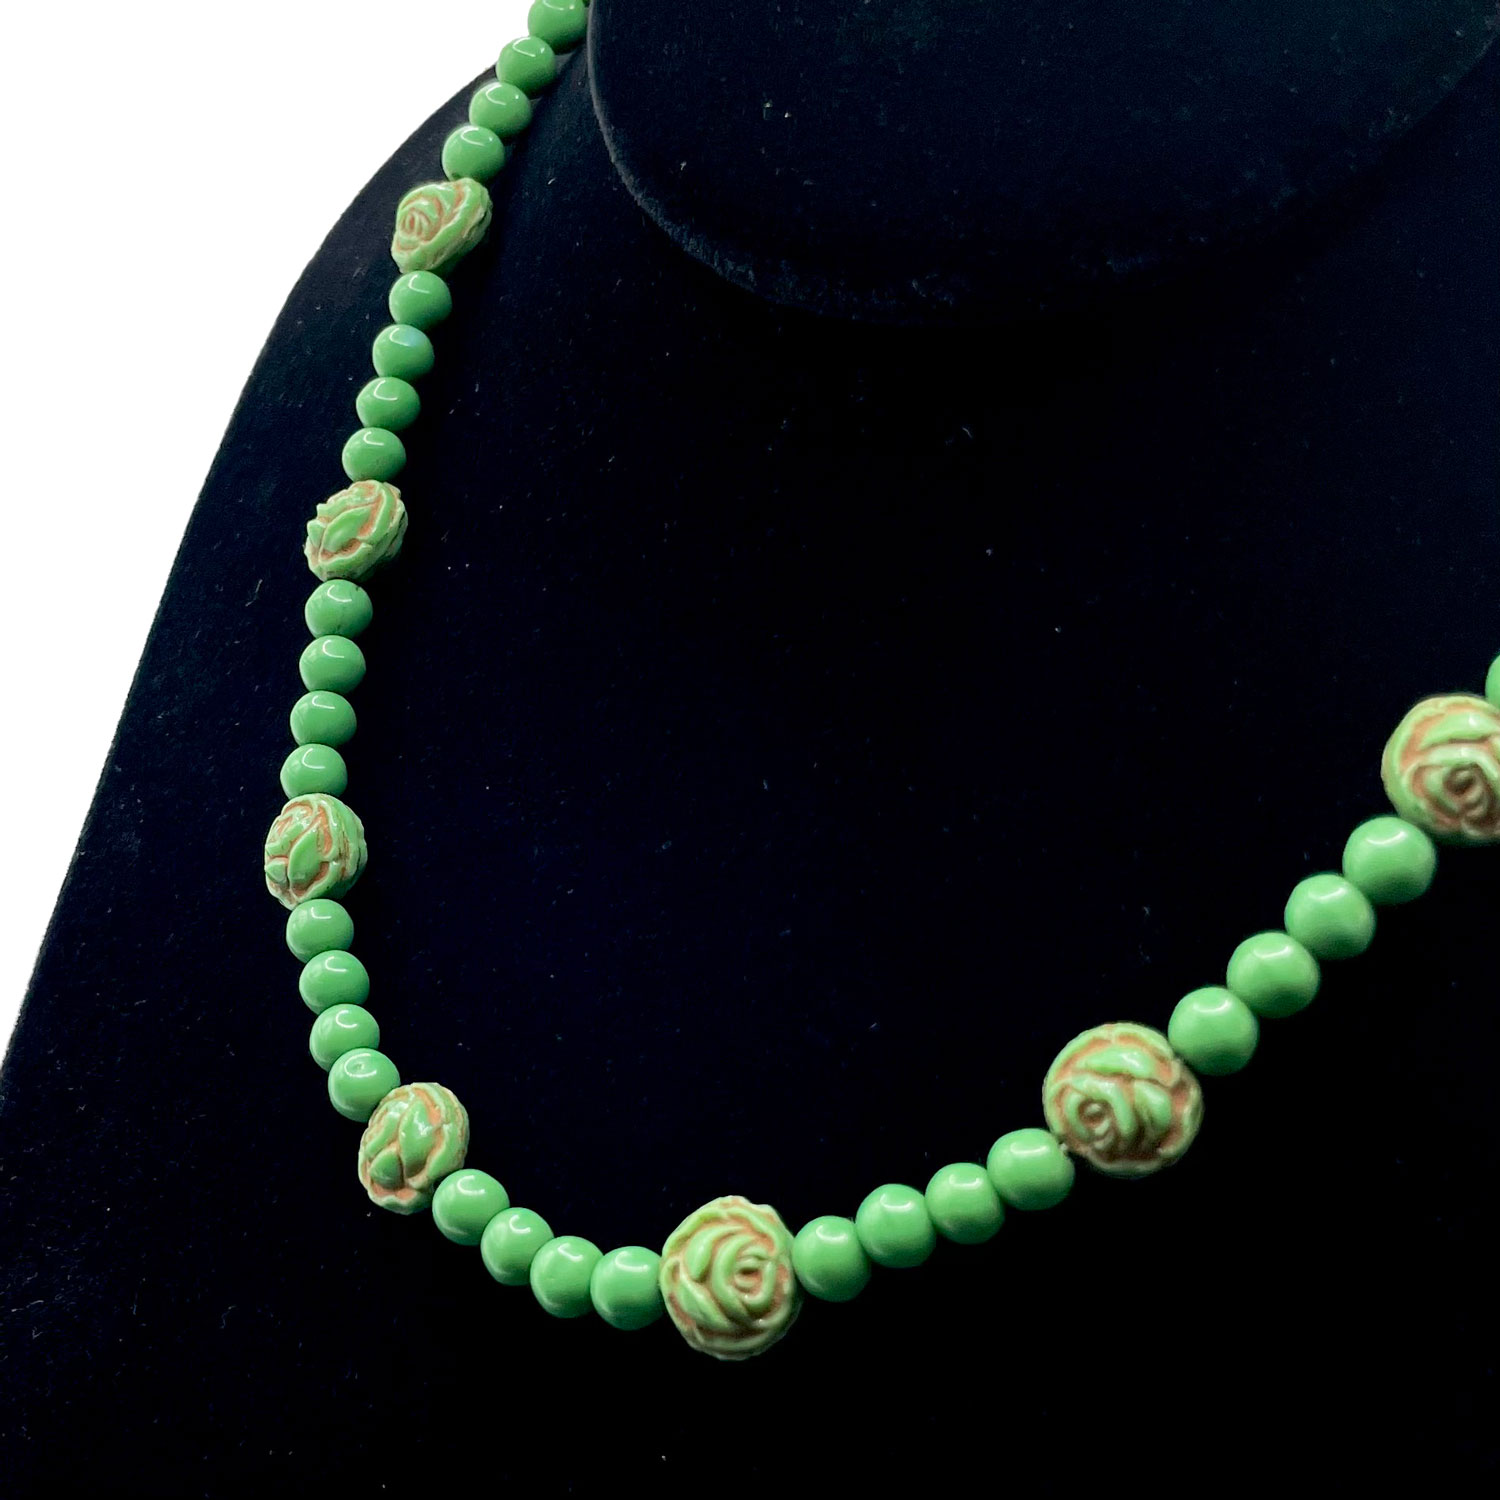 Green glass rose bead necklace